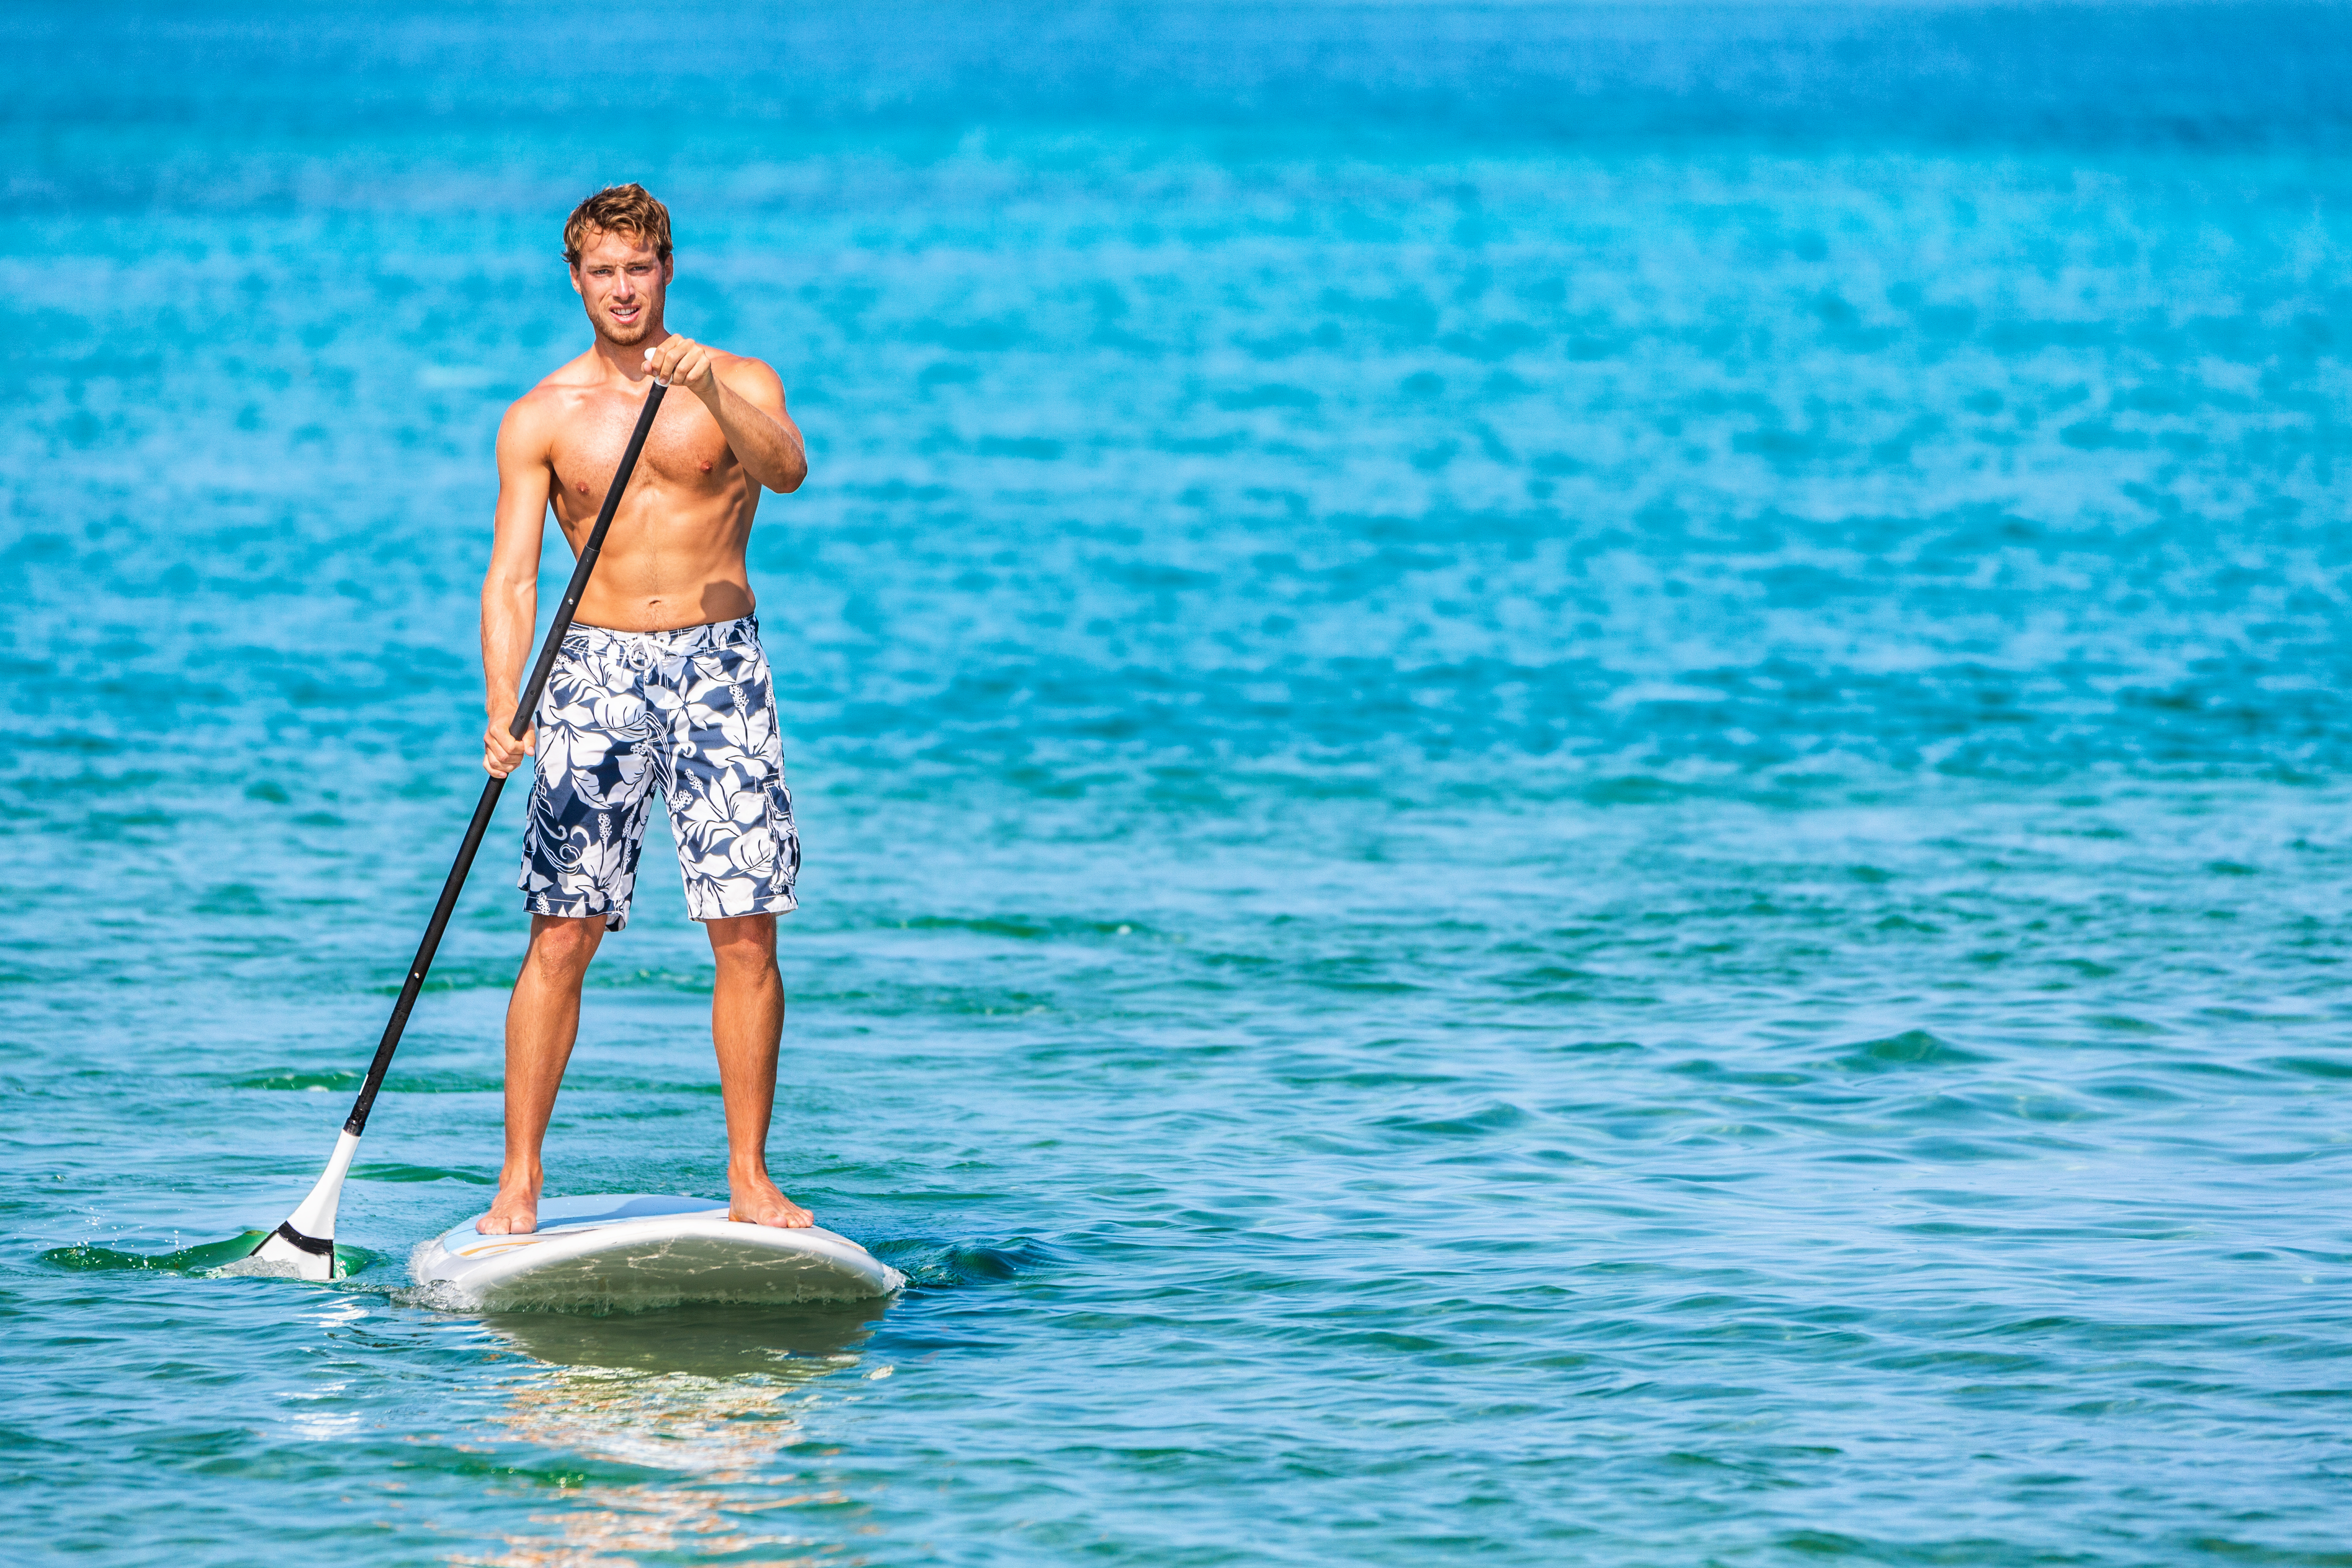 Breaking down the gifts for paddleboarders